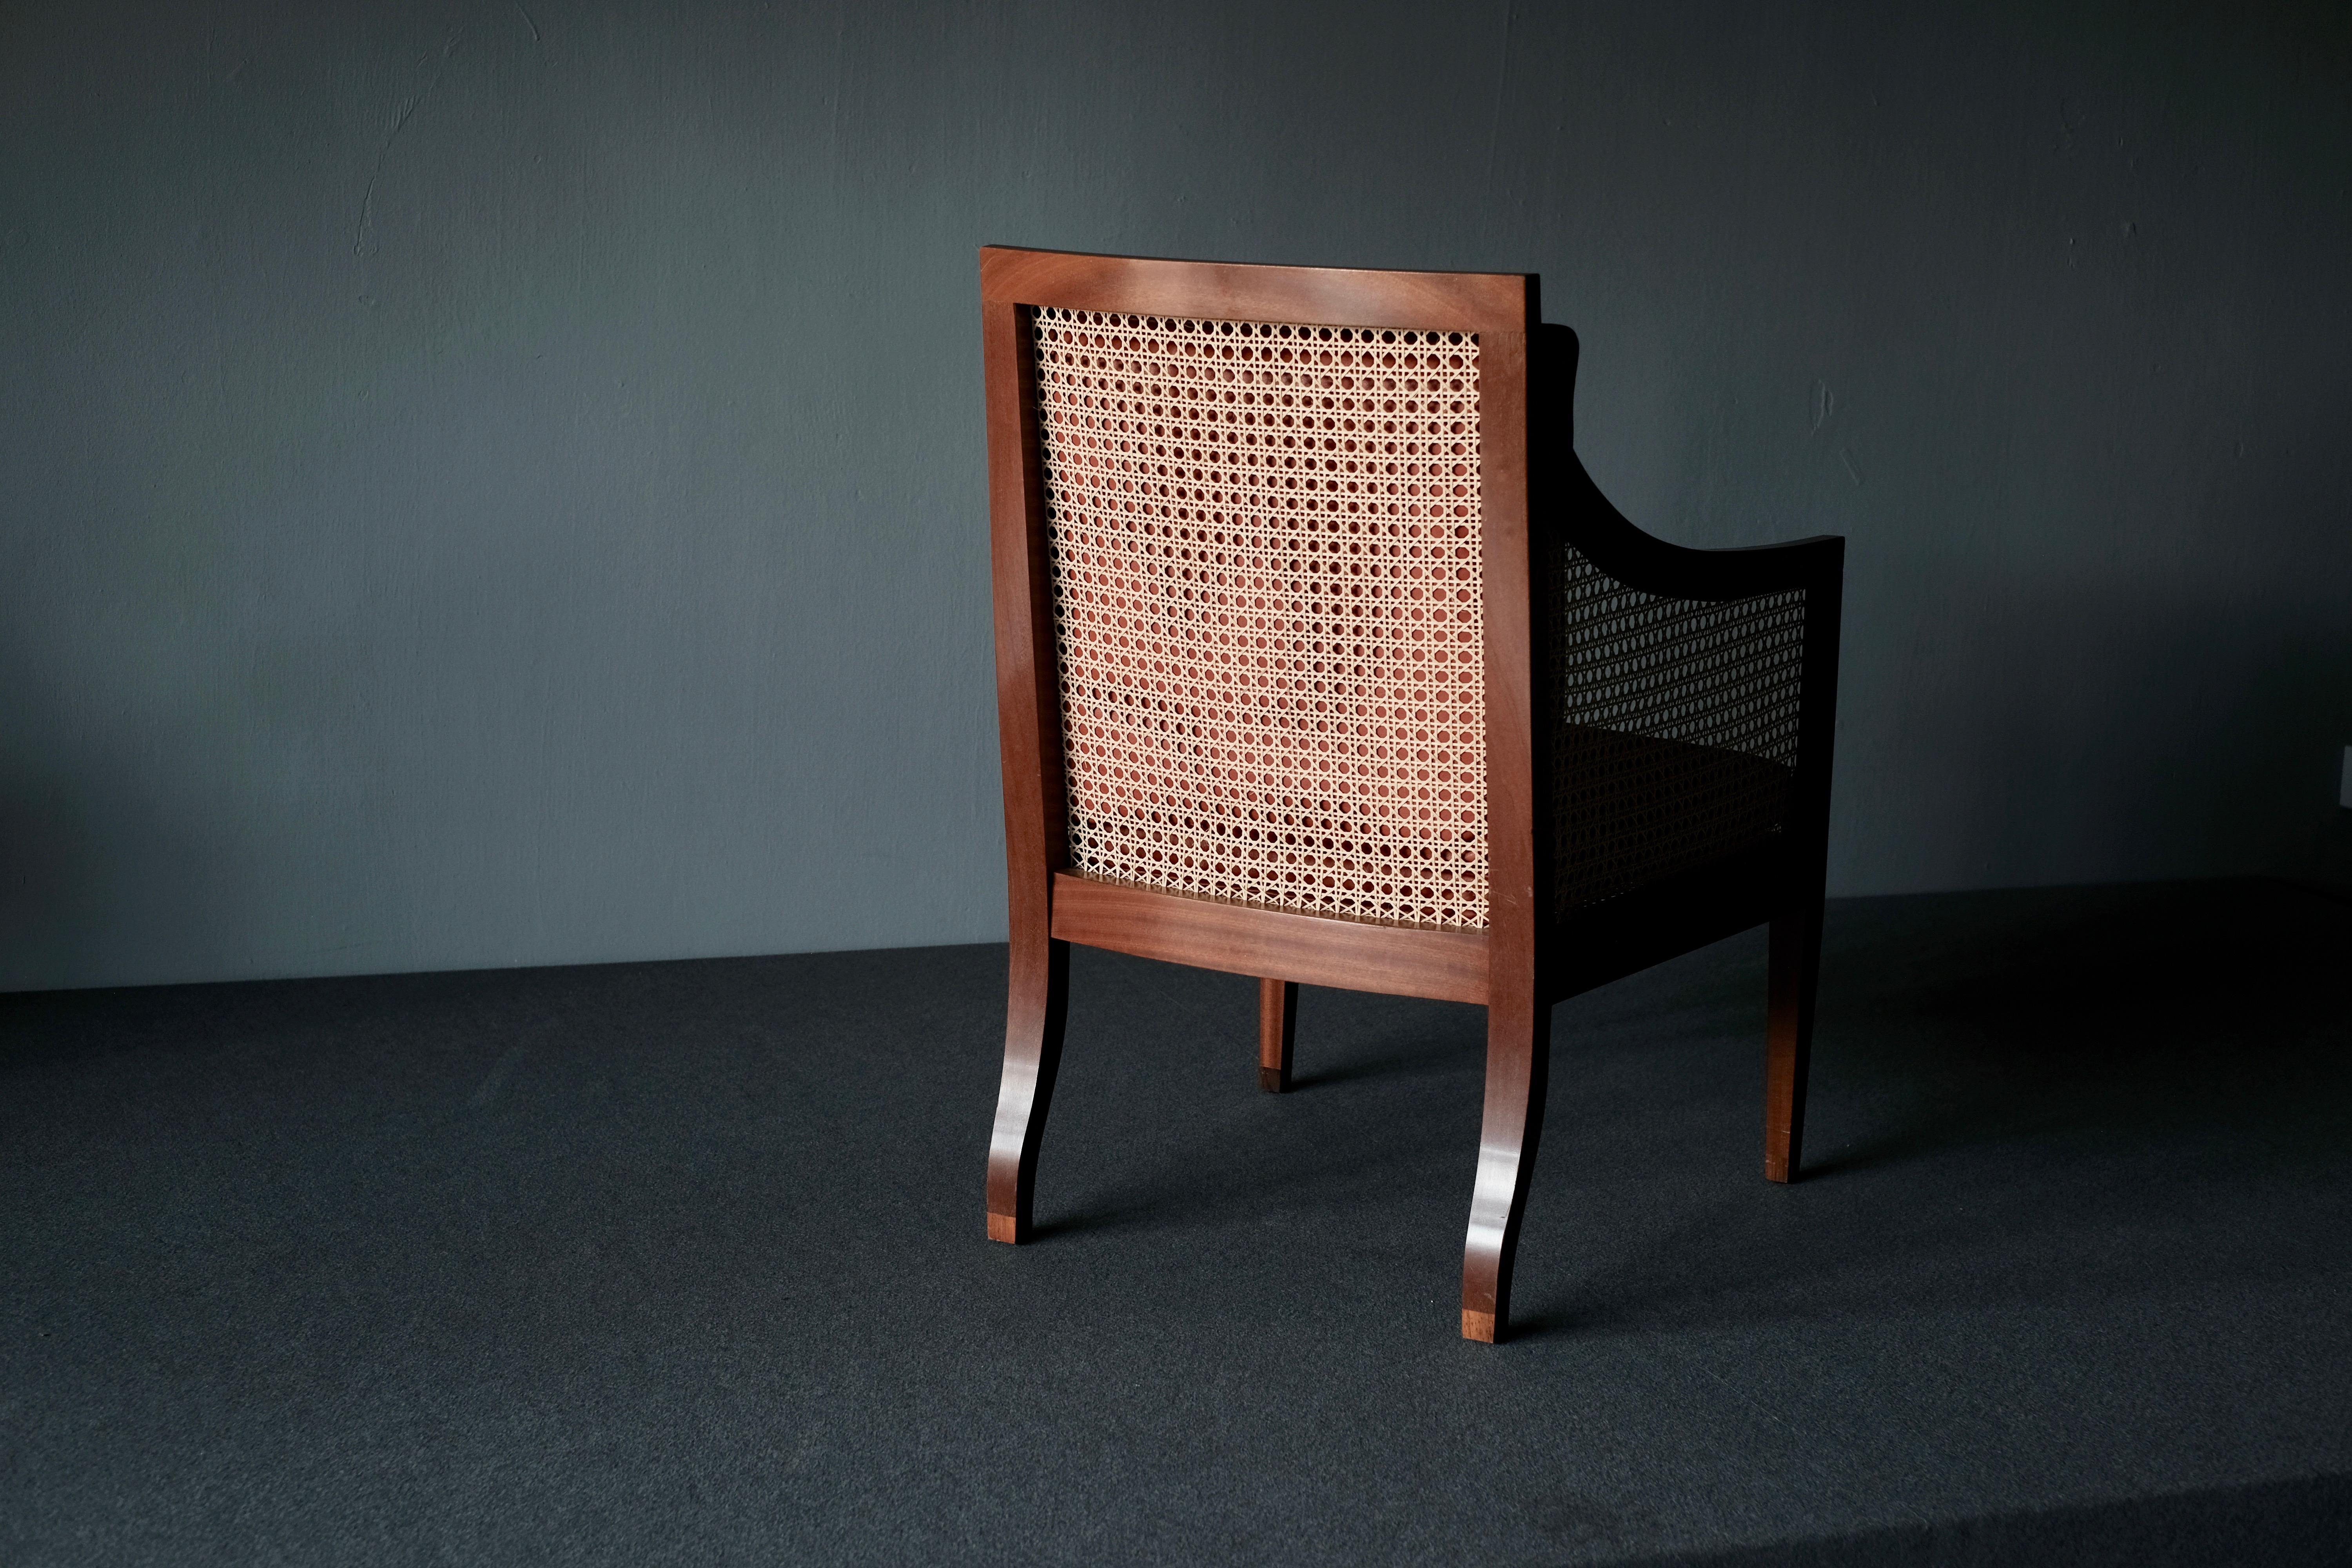 Really beautiful and elegant Kaare Klint easy chair designed in 1932 and produced by Rud. Rasmussens, Denmark. This bergère, model 4488 is in mahogany and has lovely rosewood veneers with hand woven cane sides, seat and back. The loose cushions are